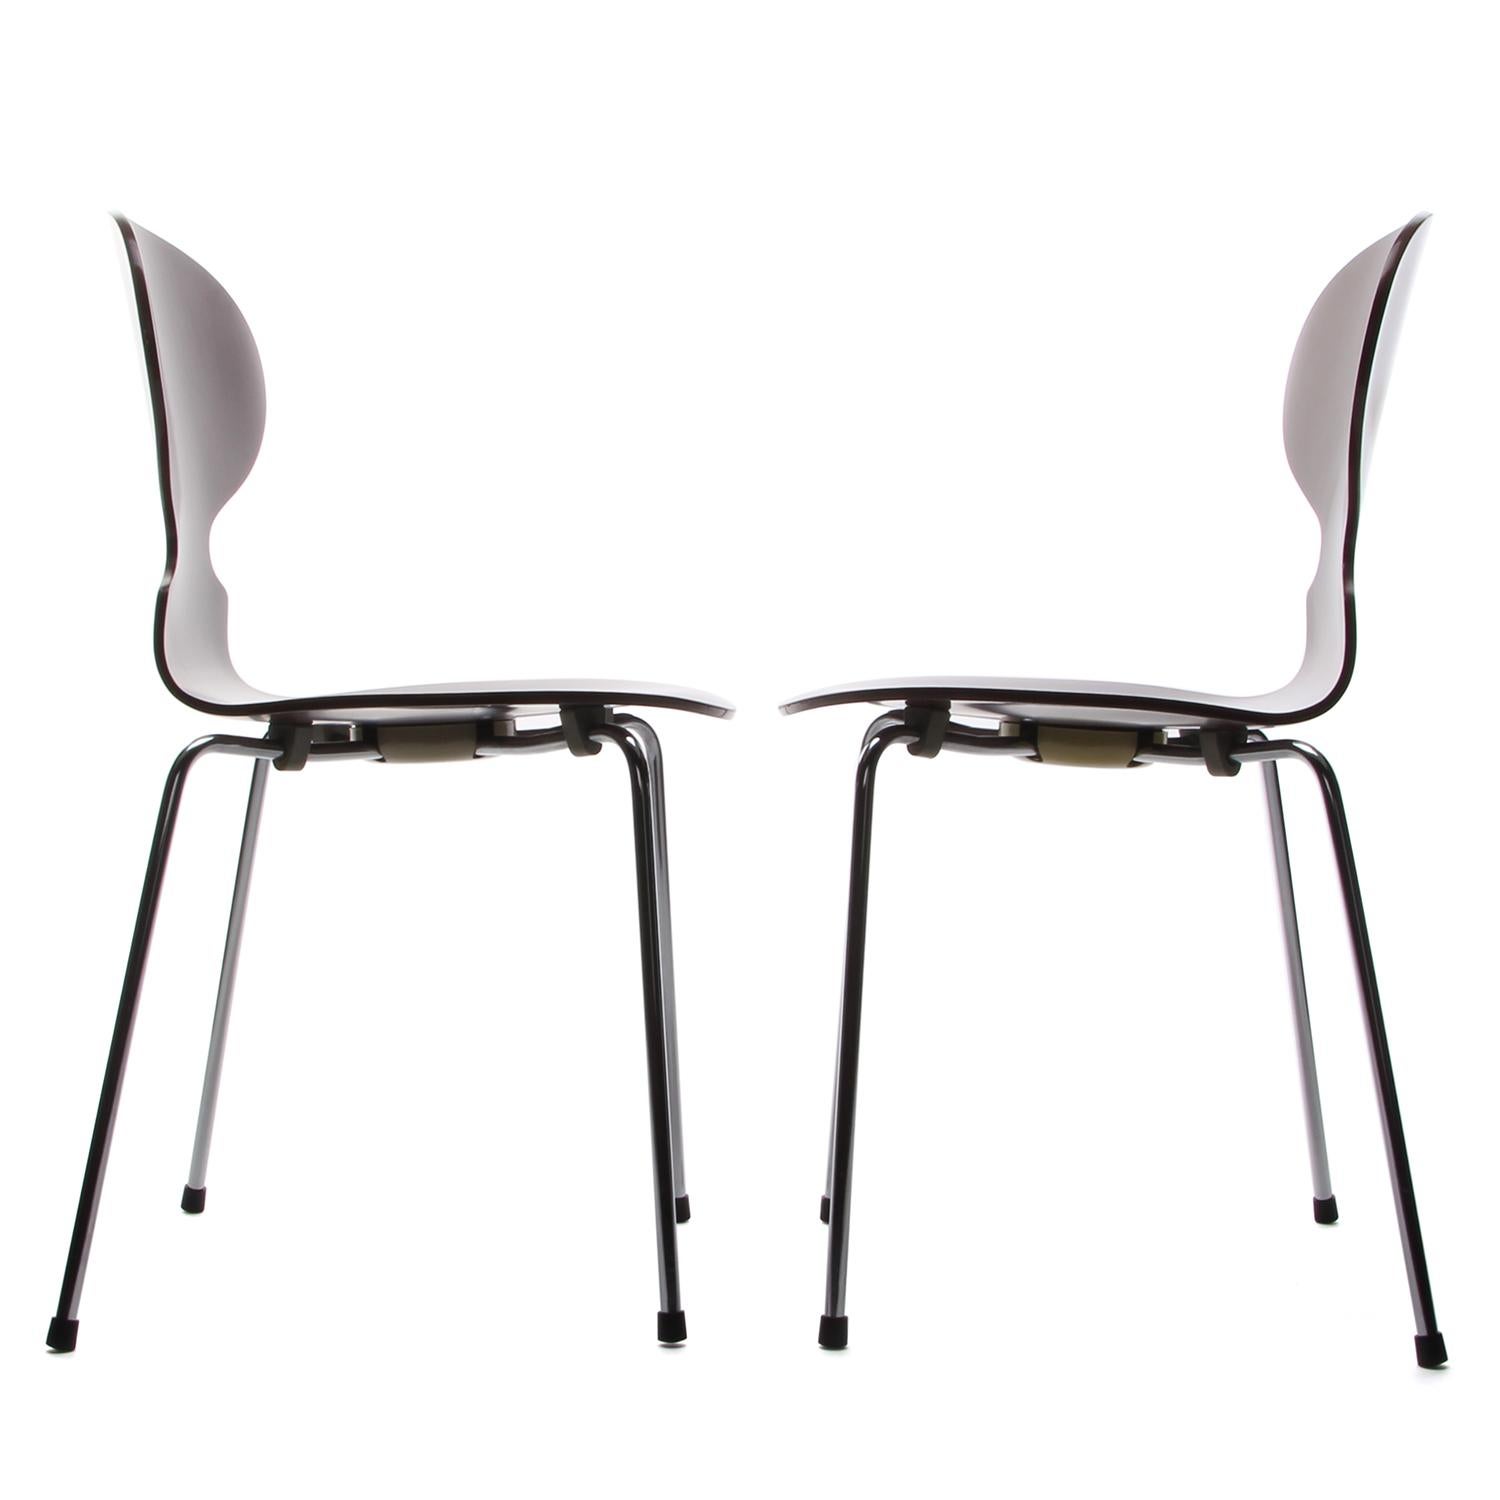 Lacquered Ant Chairs (Pair), Model 3100 Chairs by Arne Jacobsen for Fritz Hansen in 1952